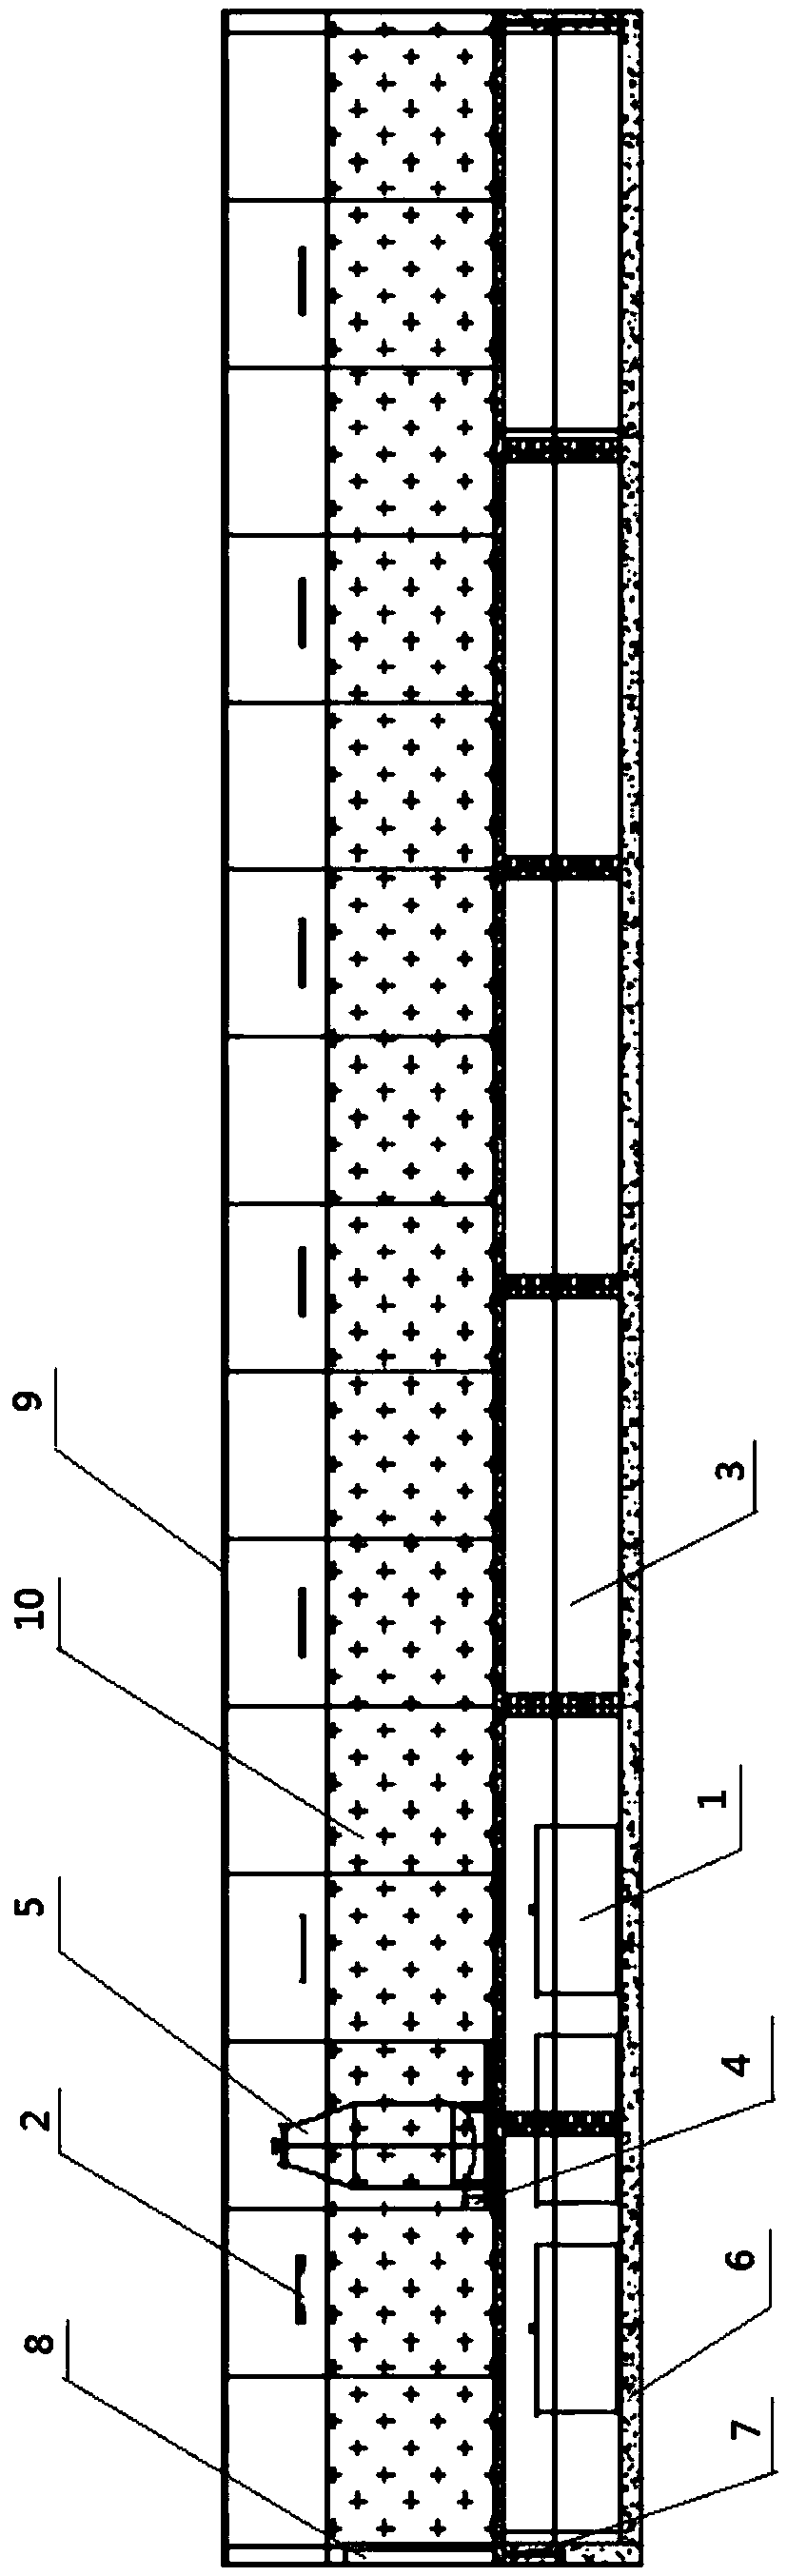 Rainbow trout culture environment release system for environmental release detection of nucleic acid vaccine and environmental release method thereof